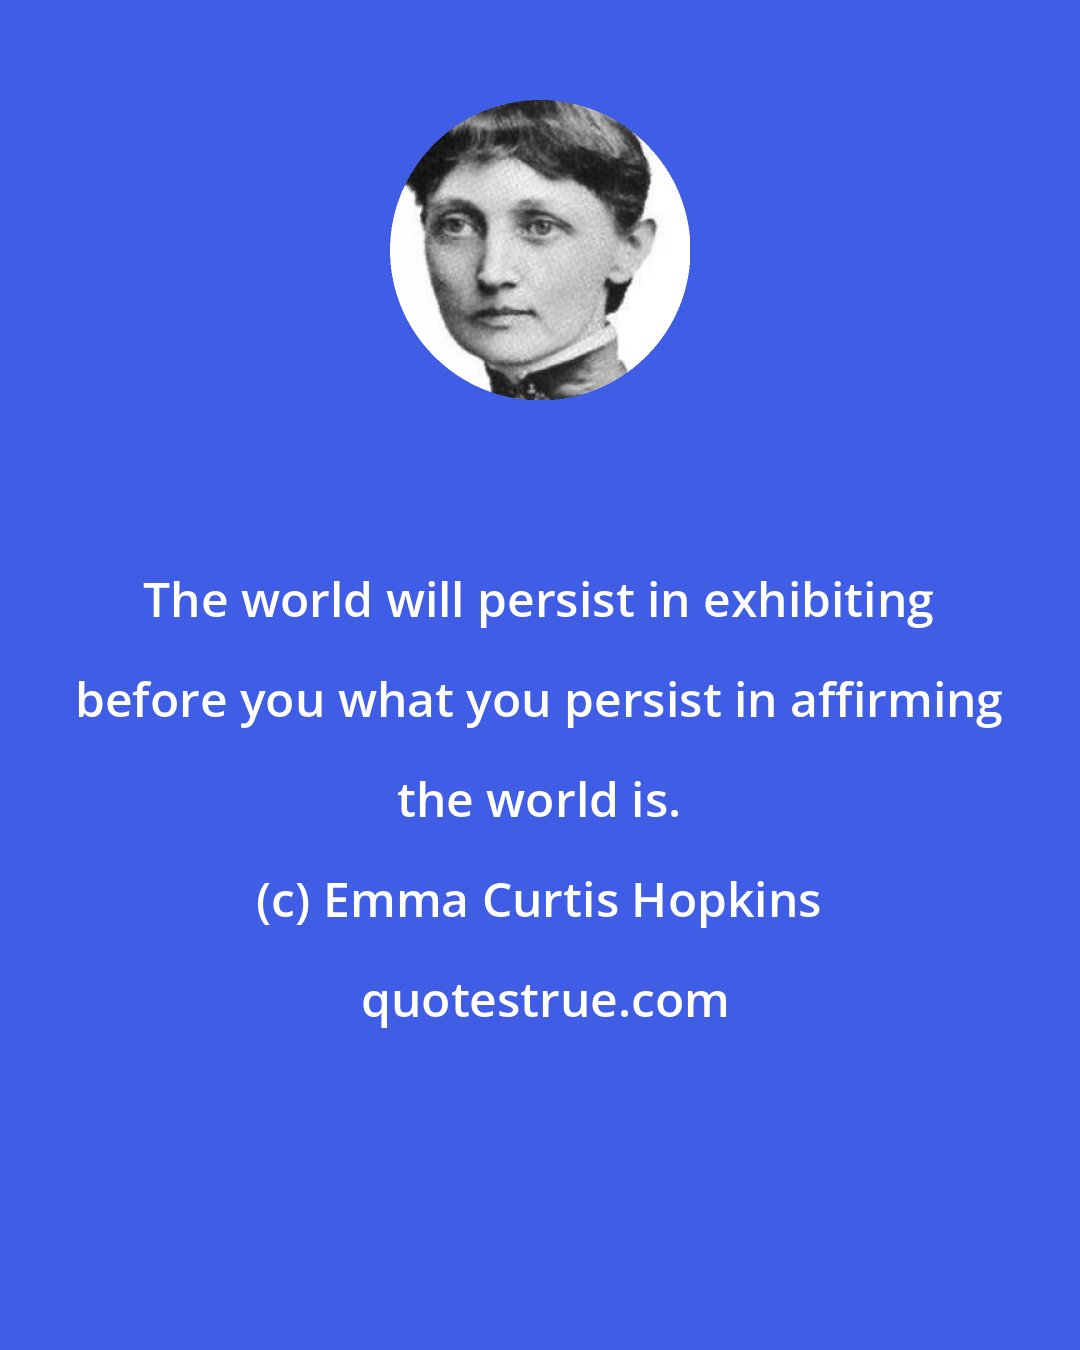 Emma Curtis Hopkins: The world will persist in exhibiting before you what you persist in affirming the world is.